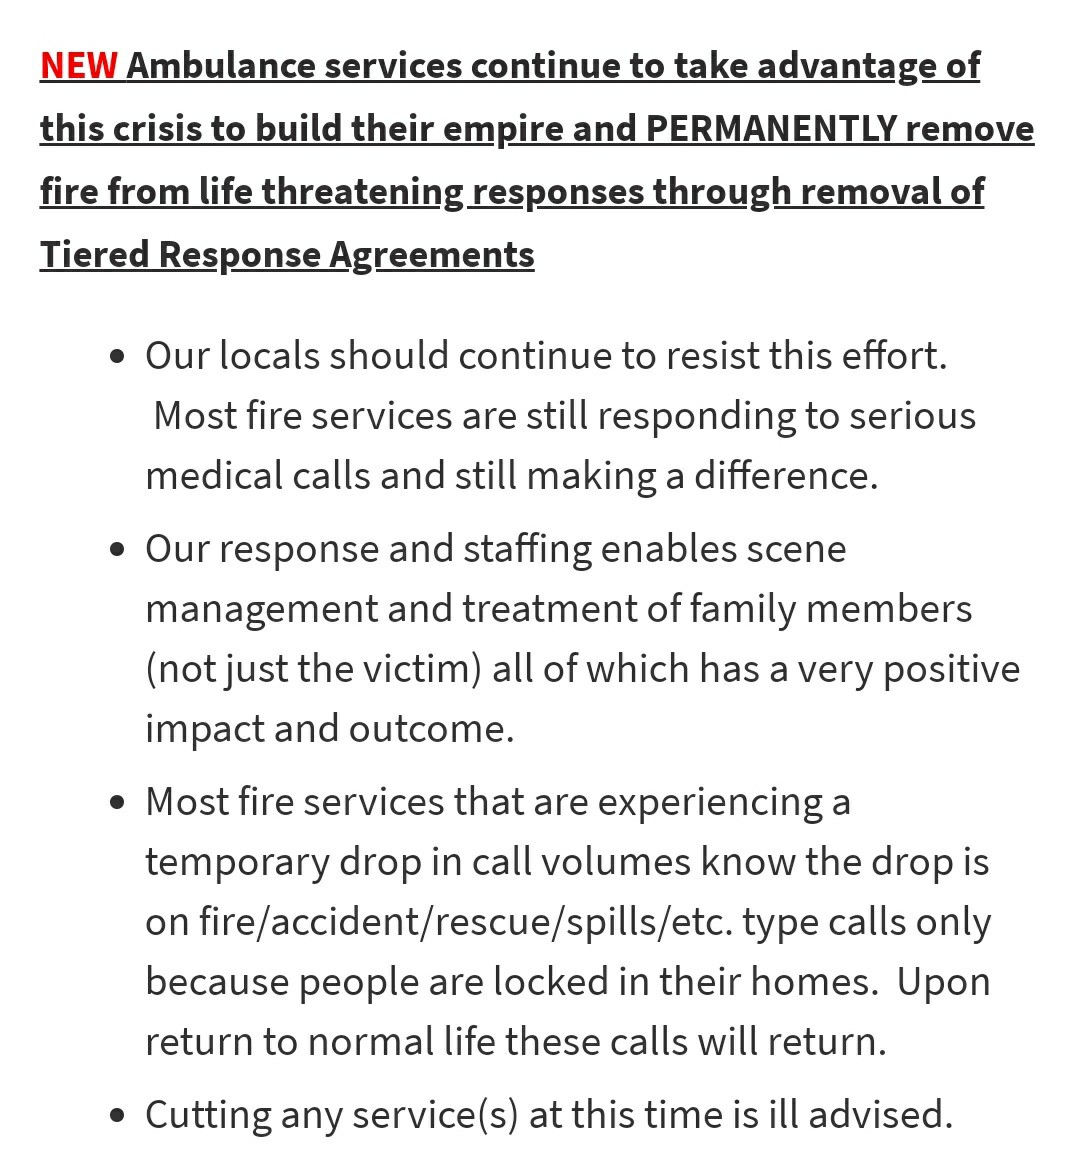 Many fire services in ON have voluntarily edited their tiered response to reduce lower acuity medicals. Others have done so in conjunction with physicians and/or Paramedic Service consultation. For the  @opffa to put this on their website and blame Paramedics is frankly appalling.